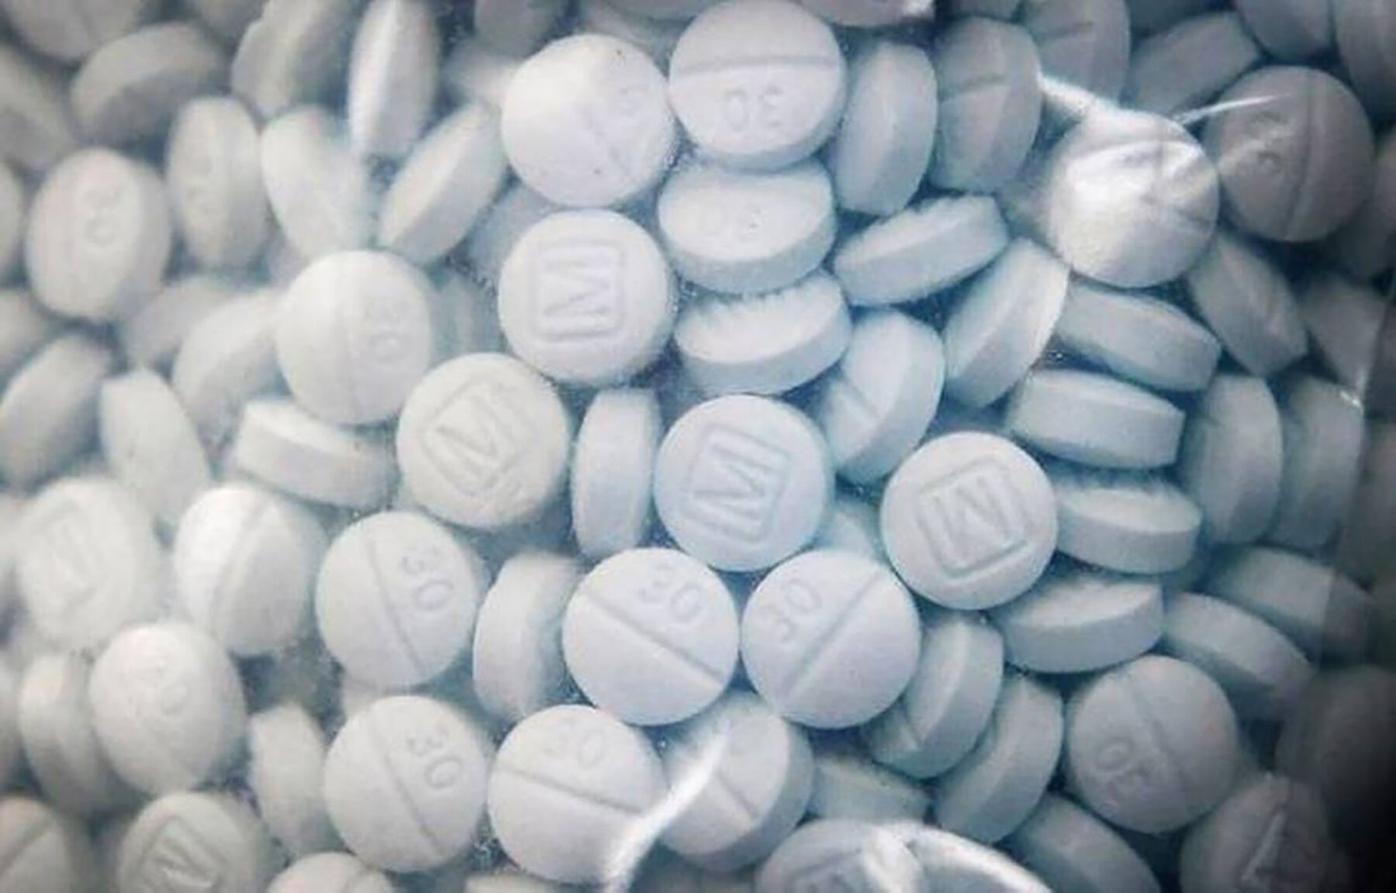 Counterfeit drugs presumed to be Xanax recovered in north Alabama